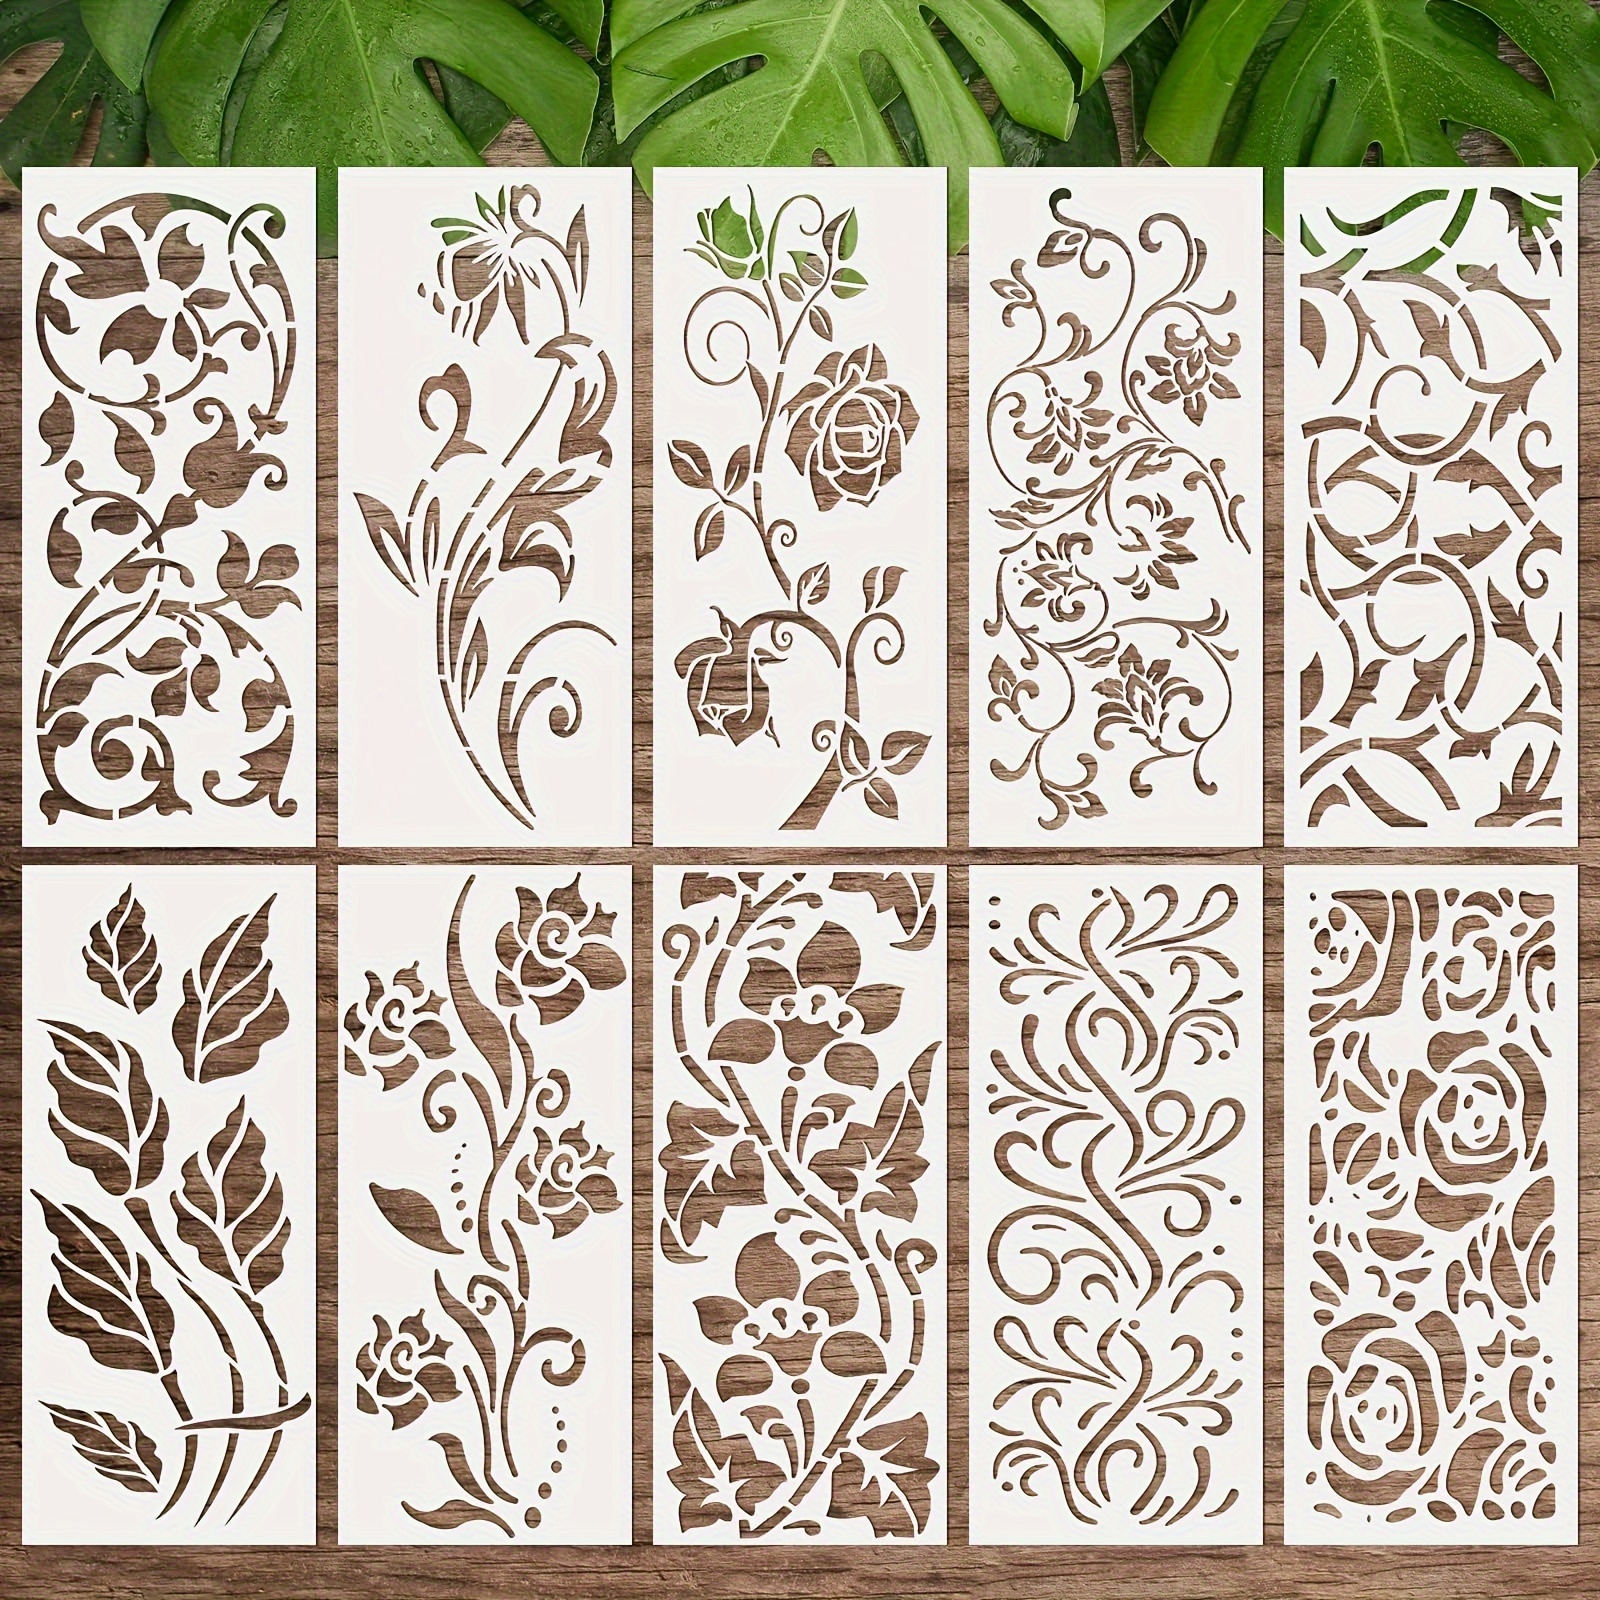 

10 Pieces Leaf Painting Stencils Leaf Wall Stencil Botanical Leaves Reusable Diy Crafts Drawing Templates Stencils For Painting On Wood Wall Canvas Card Home Decor Eid Al-adha Mubarak